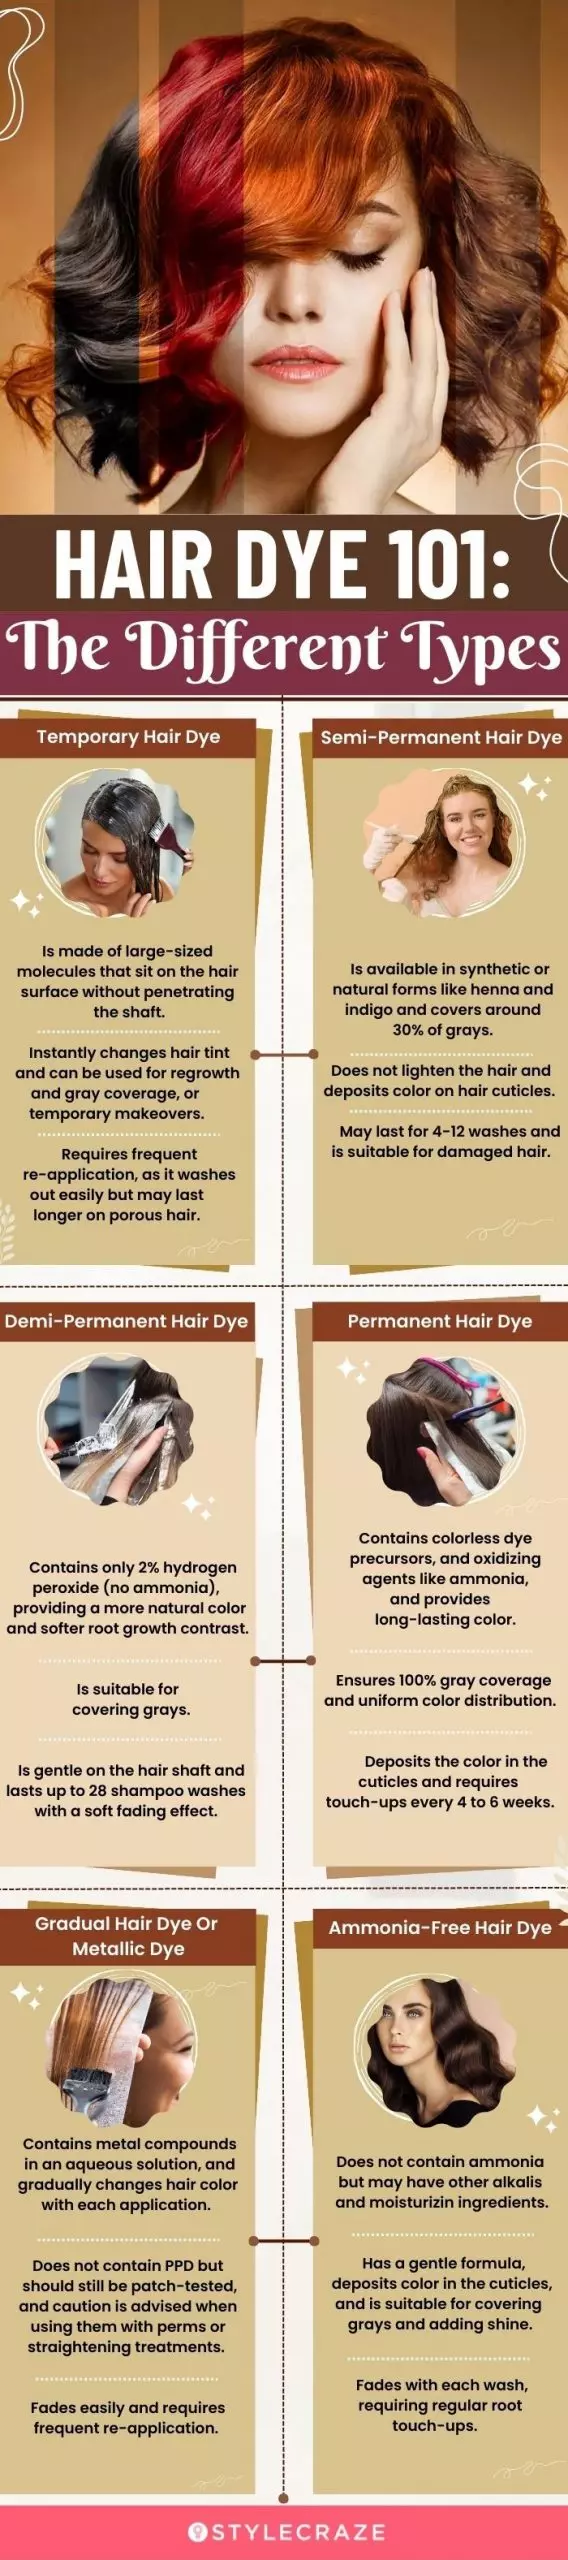 hair dye 101 the different types (infographic)